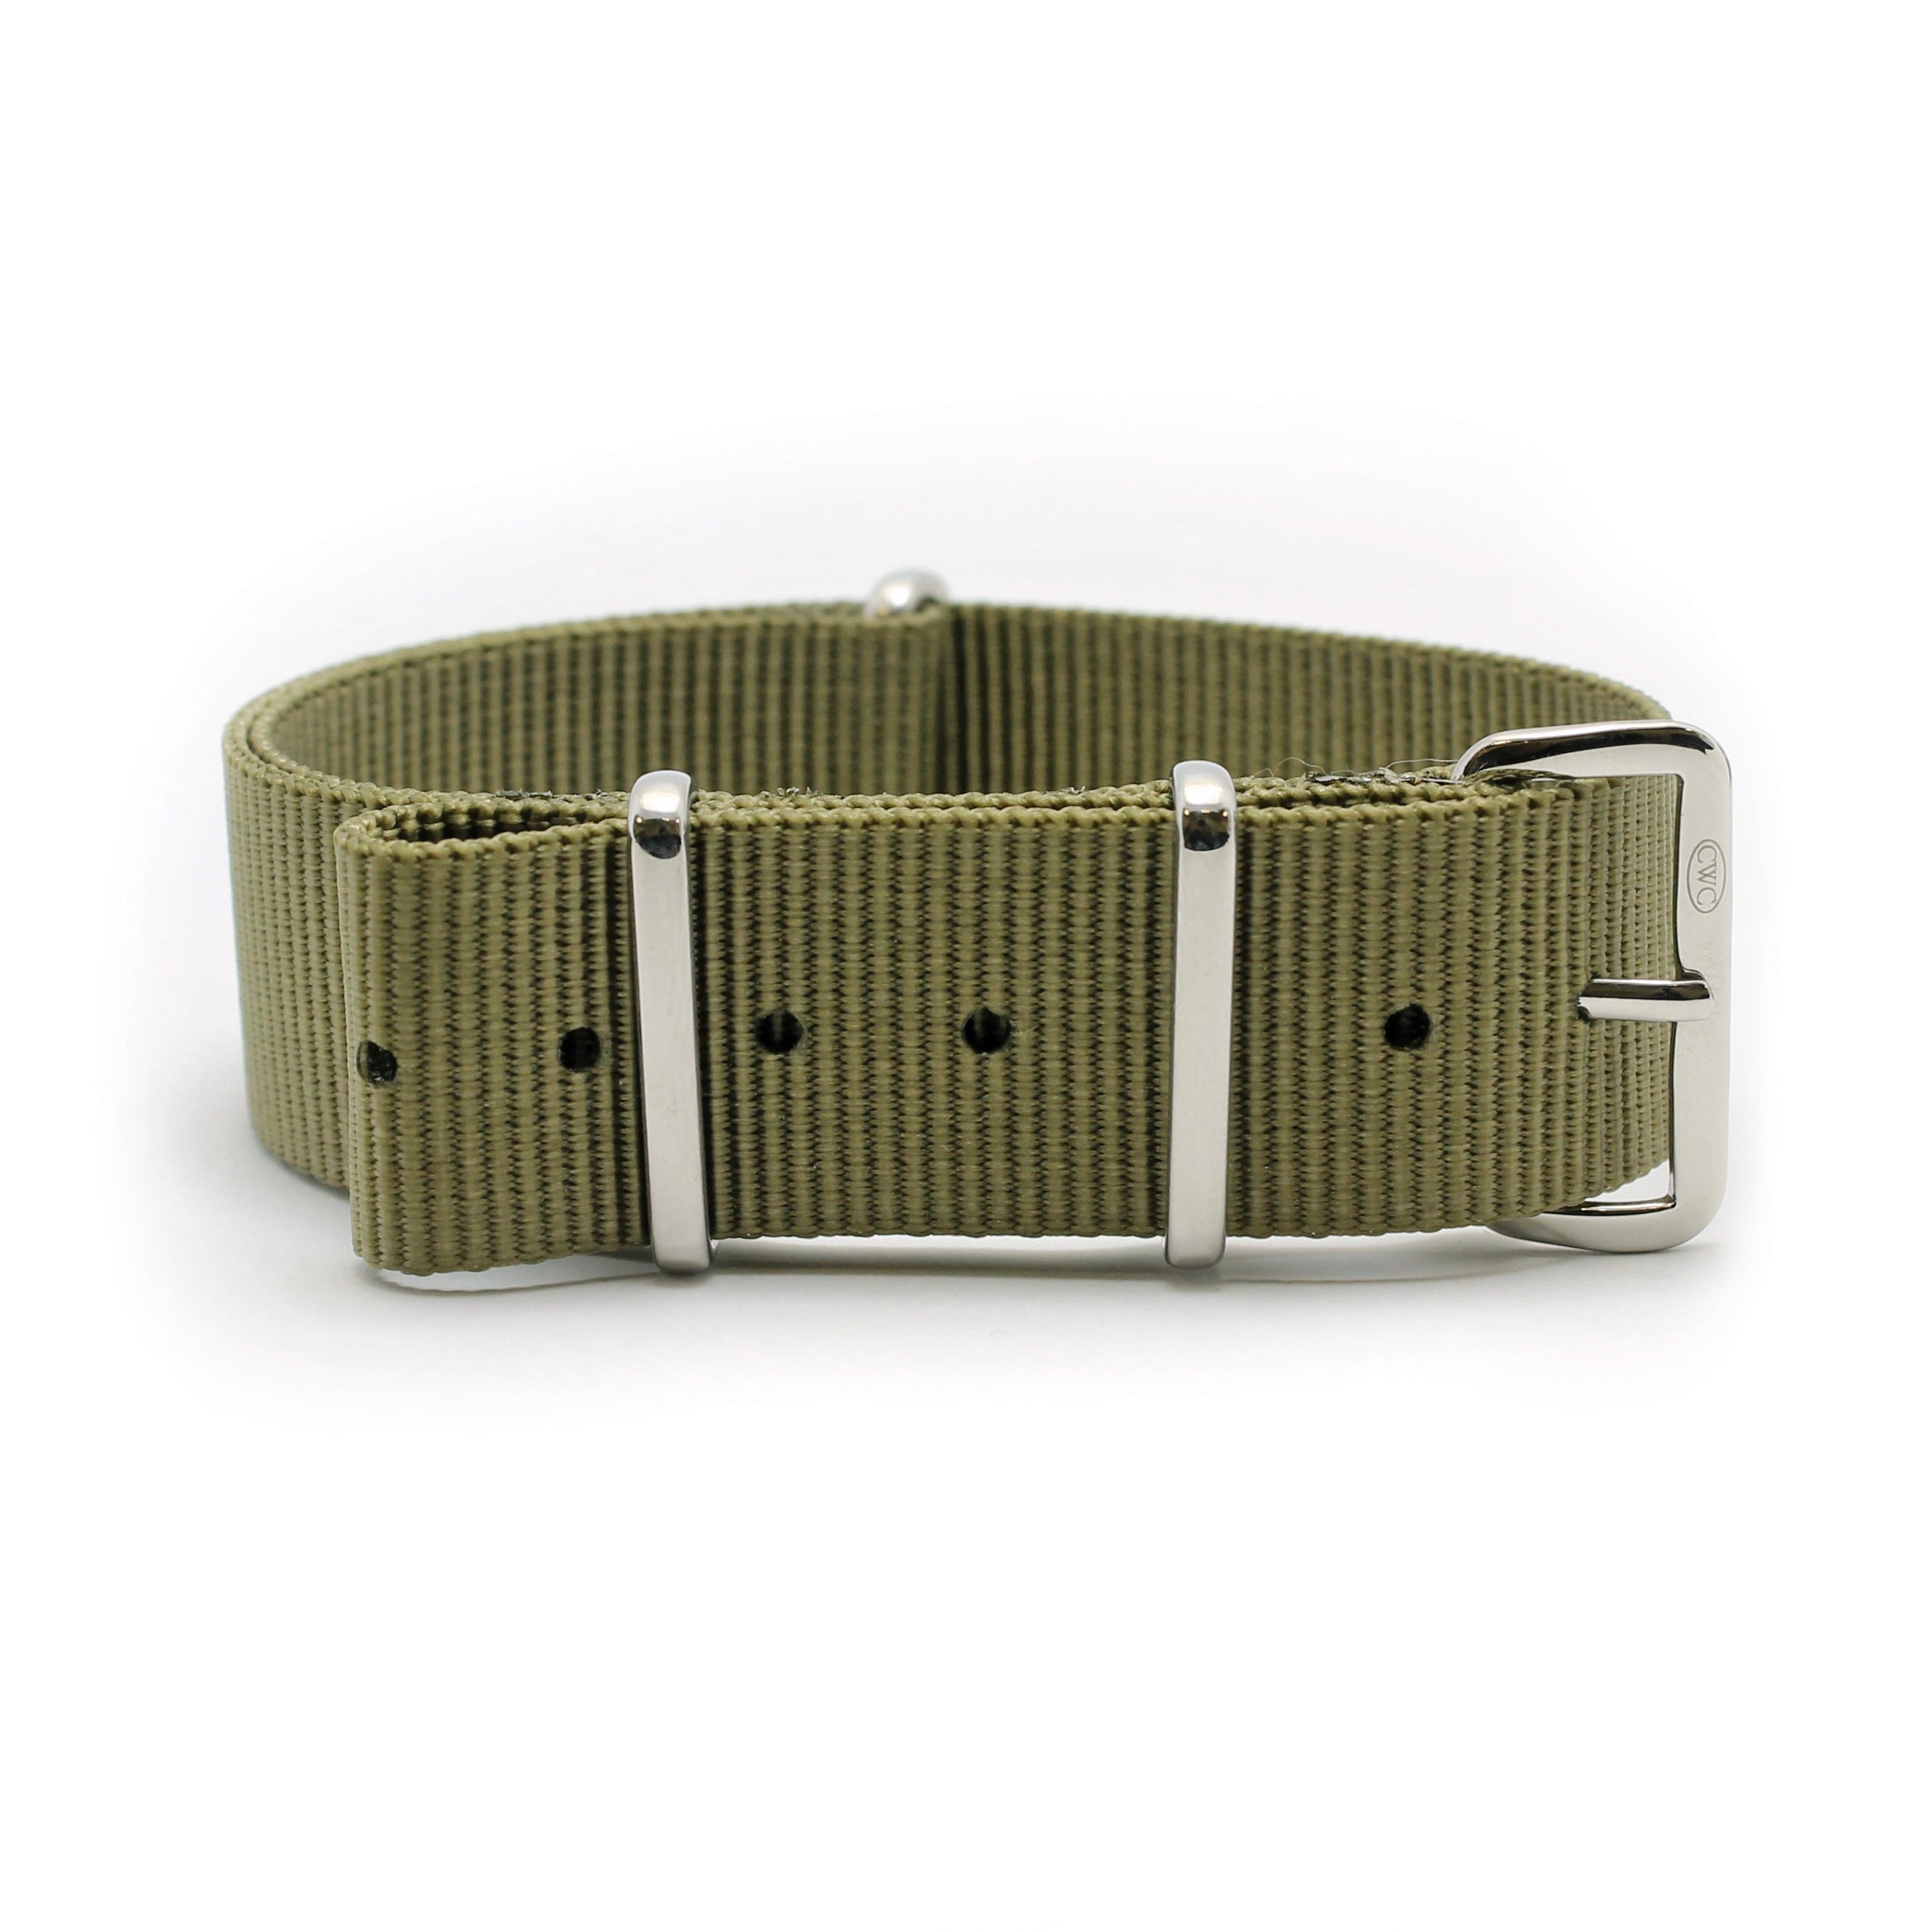 CABOT MILITARY WATCH STRAP - GREEN WITH GLOSS SILVER BUCKLE